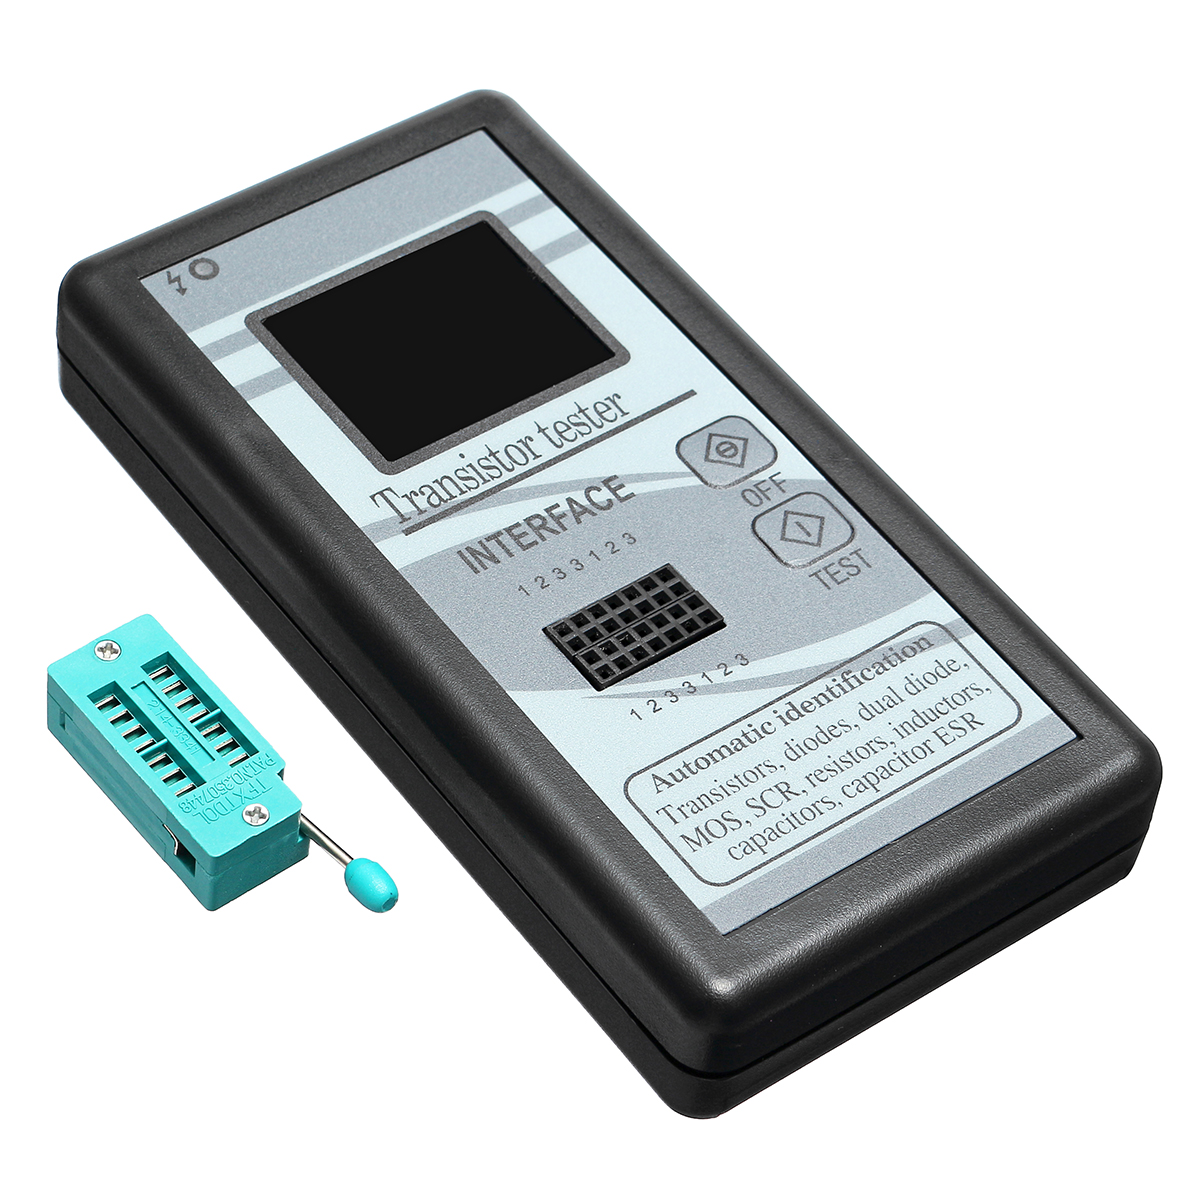 18-Inch-TFT-LCD-M328-Transistor-Tester-Diode-Triode-Checker-Capacitance-Meter-MOS-LCR-ESR-1382434